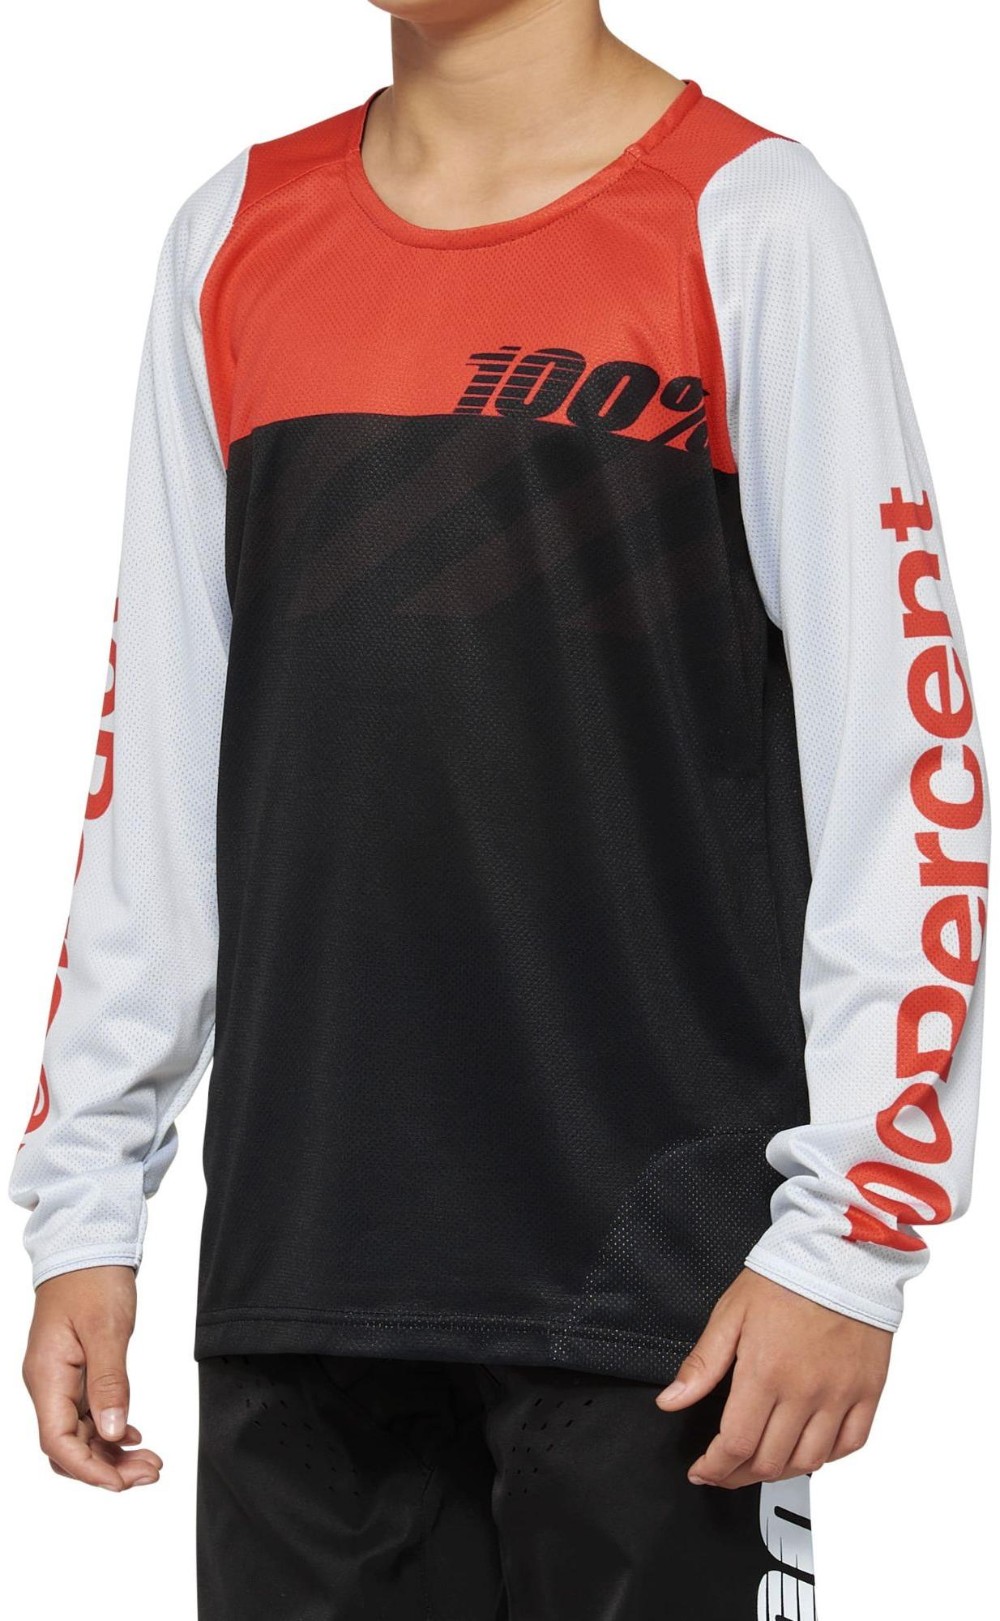 R-Core Youth Long Sleeve MTB Cycling Jersey image 0